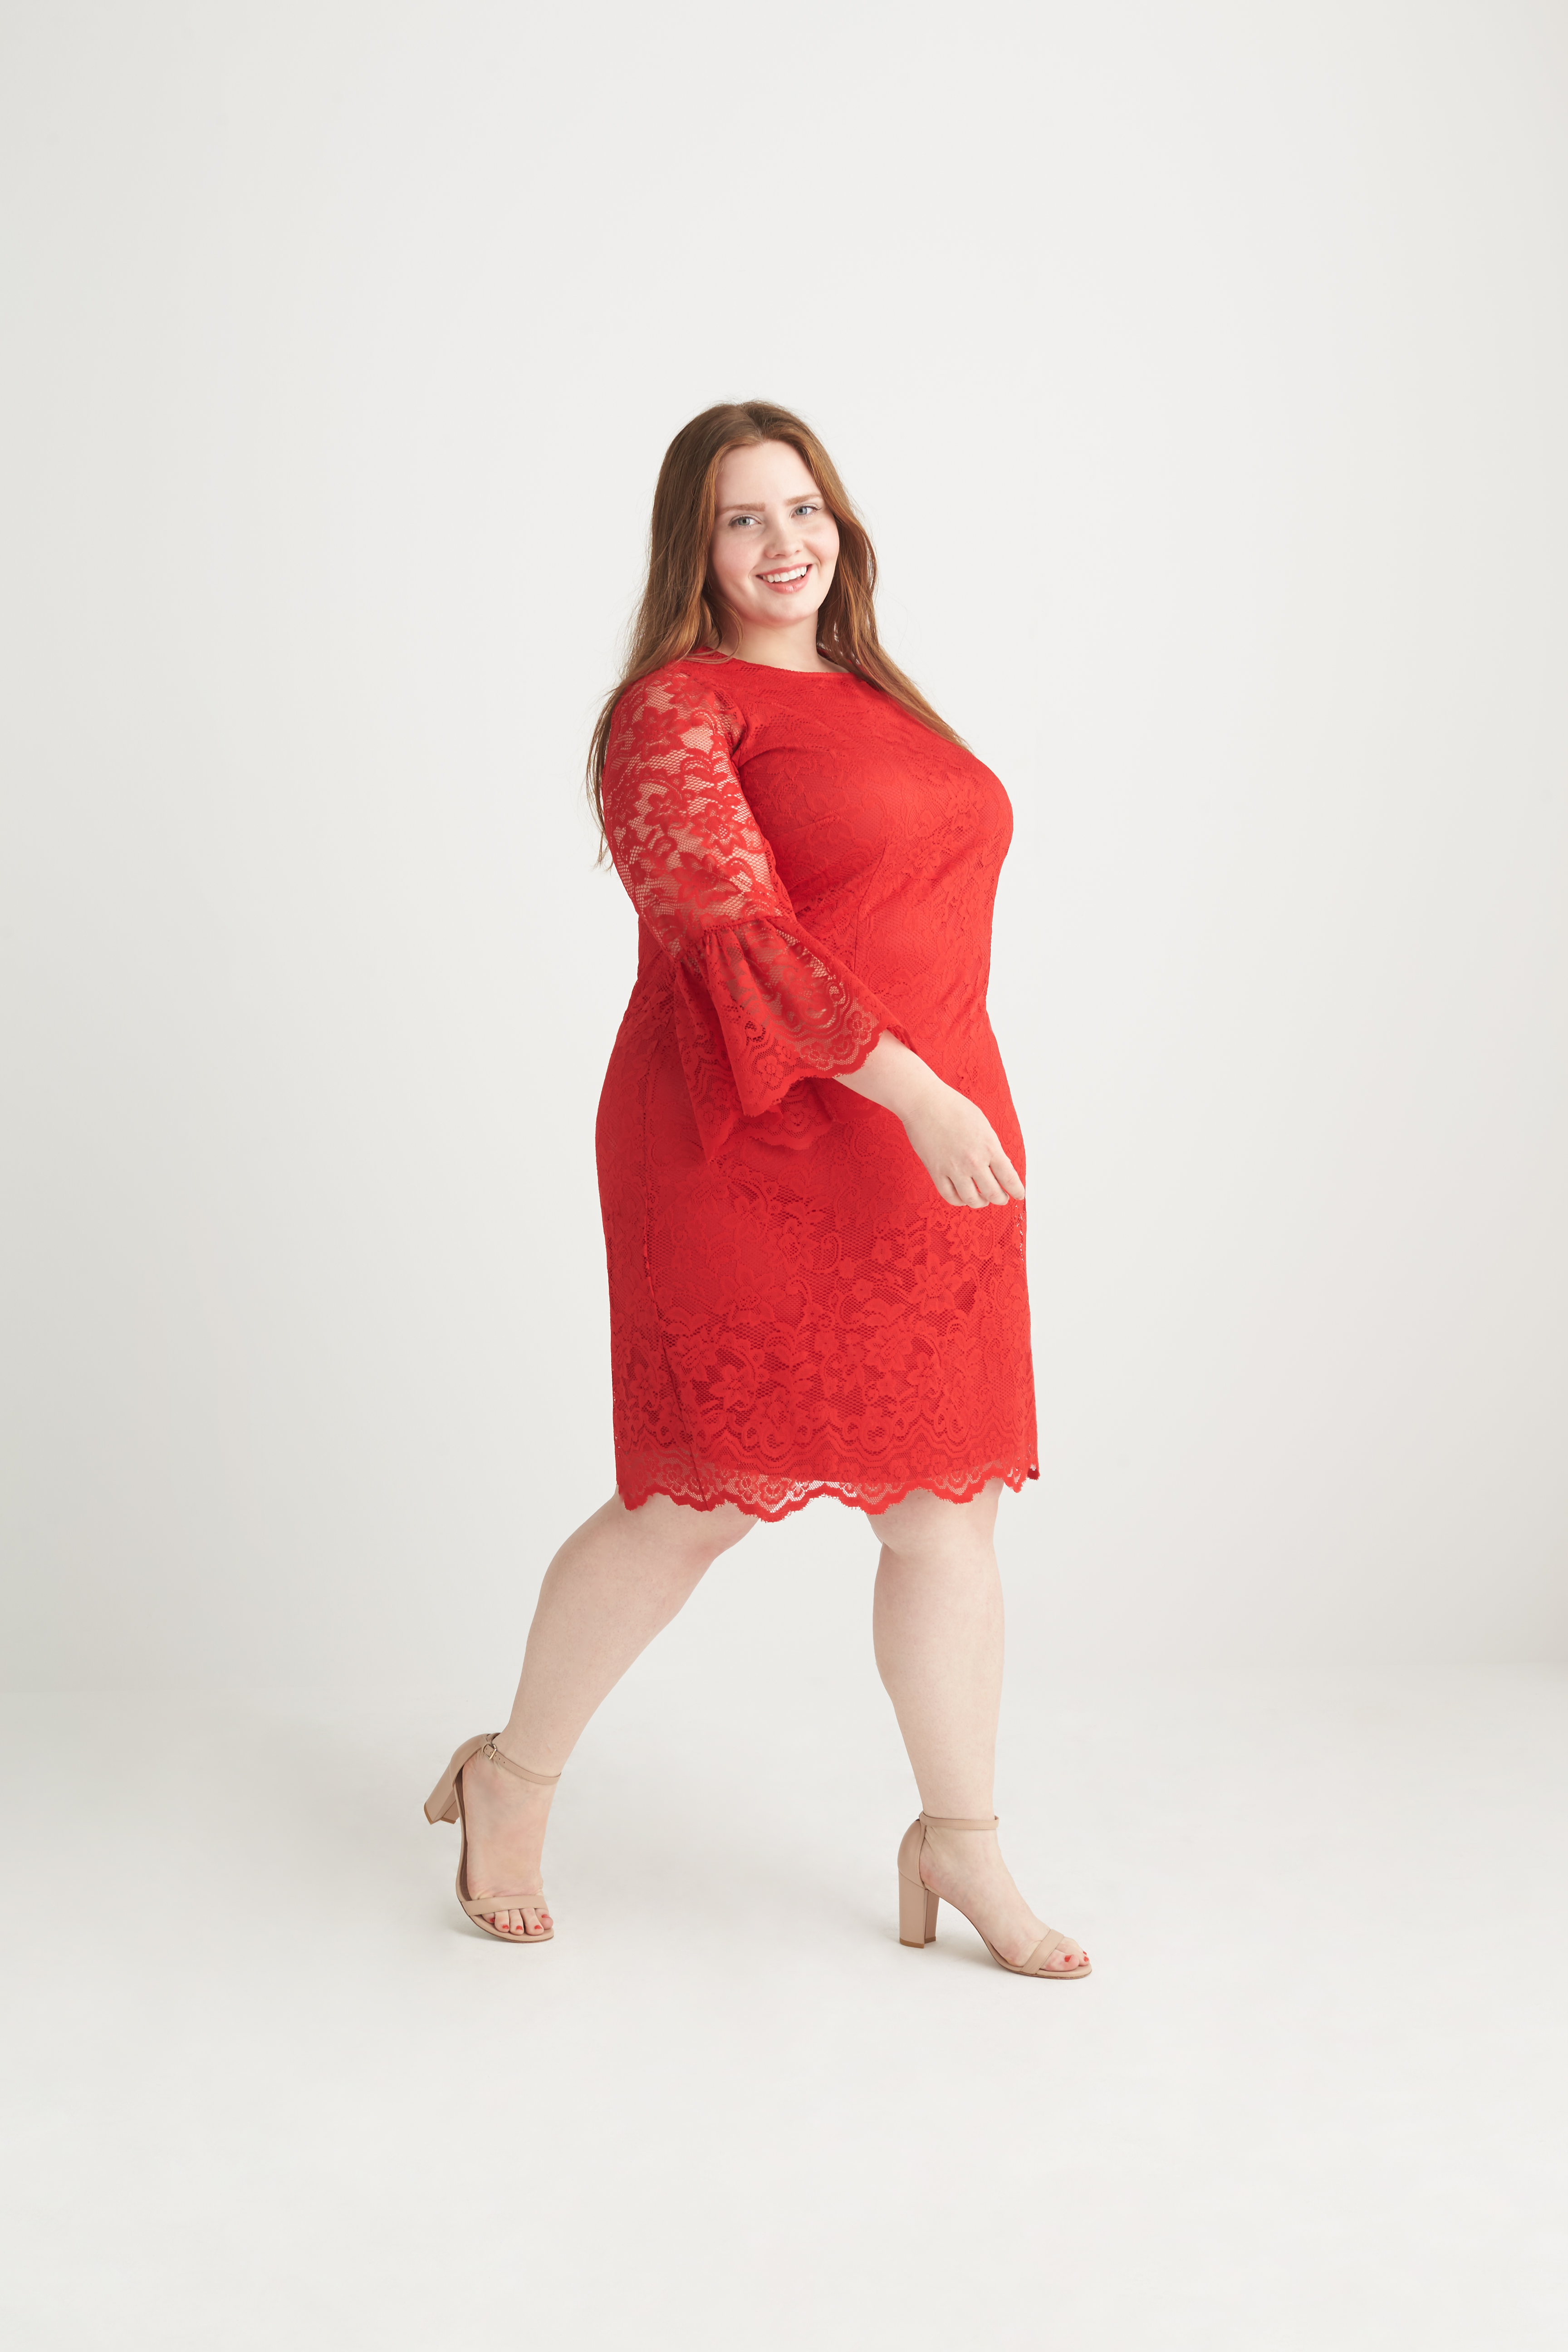 5 Things to know BEFORE You Get Signed By A Plus Size Modeling Agency